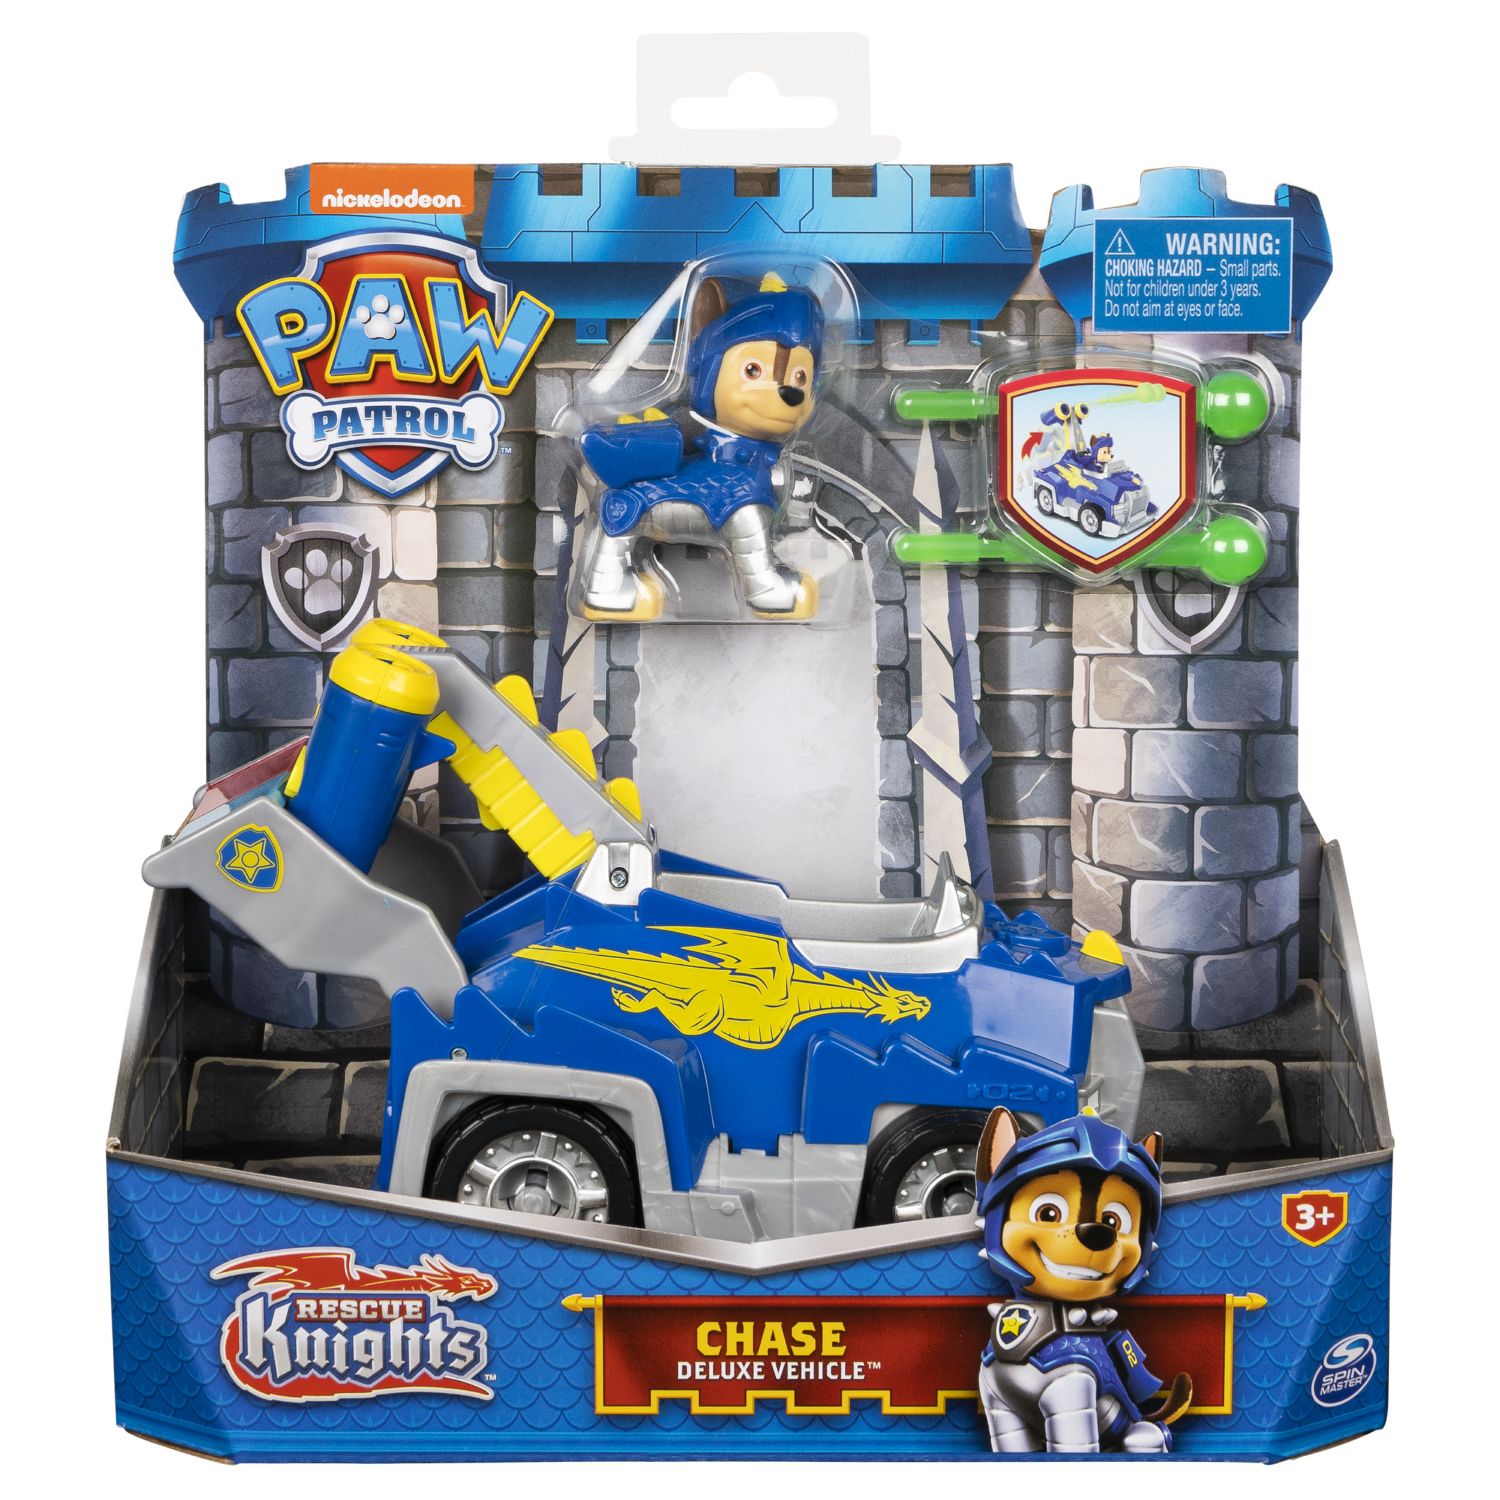 PAW PATROL RESCUE KNIGHTS DELUXE VEHICLE CHASE